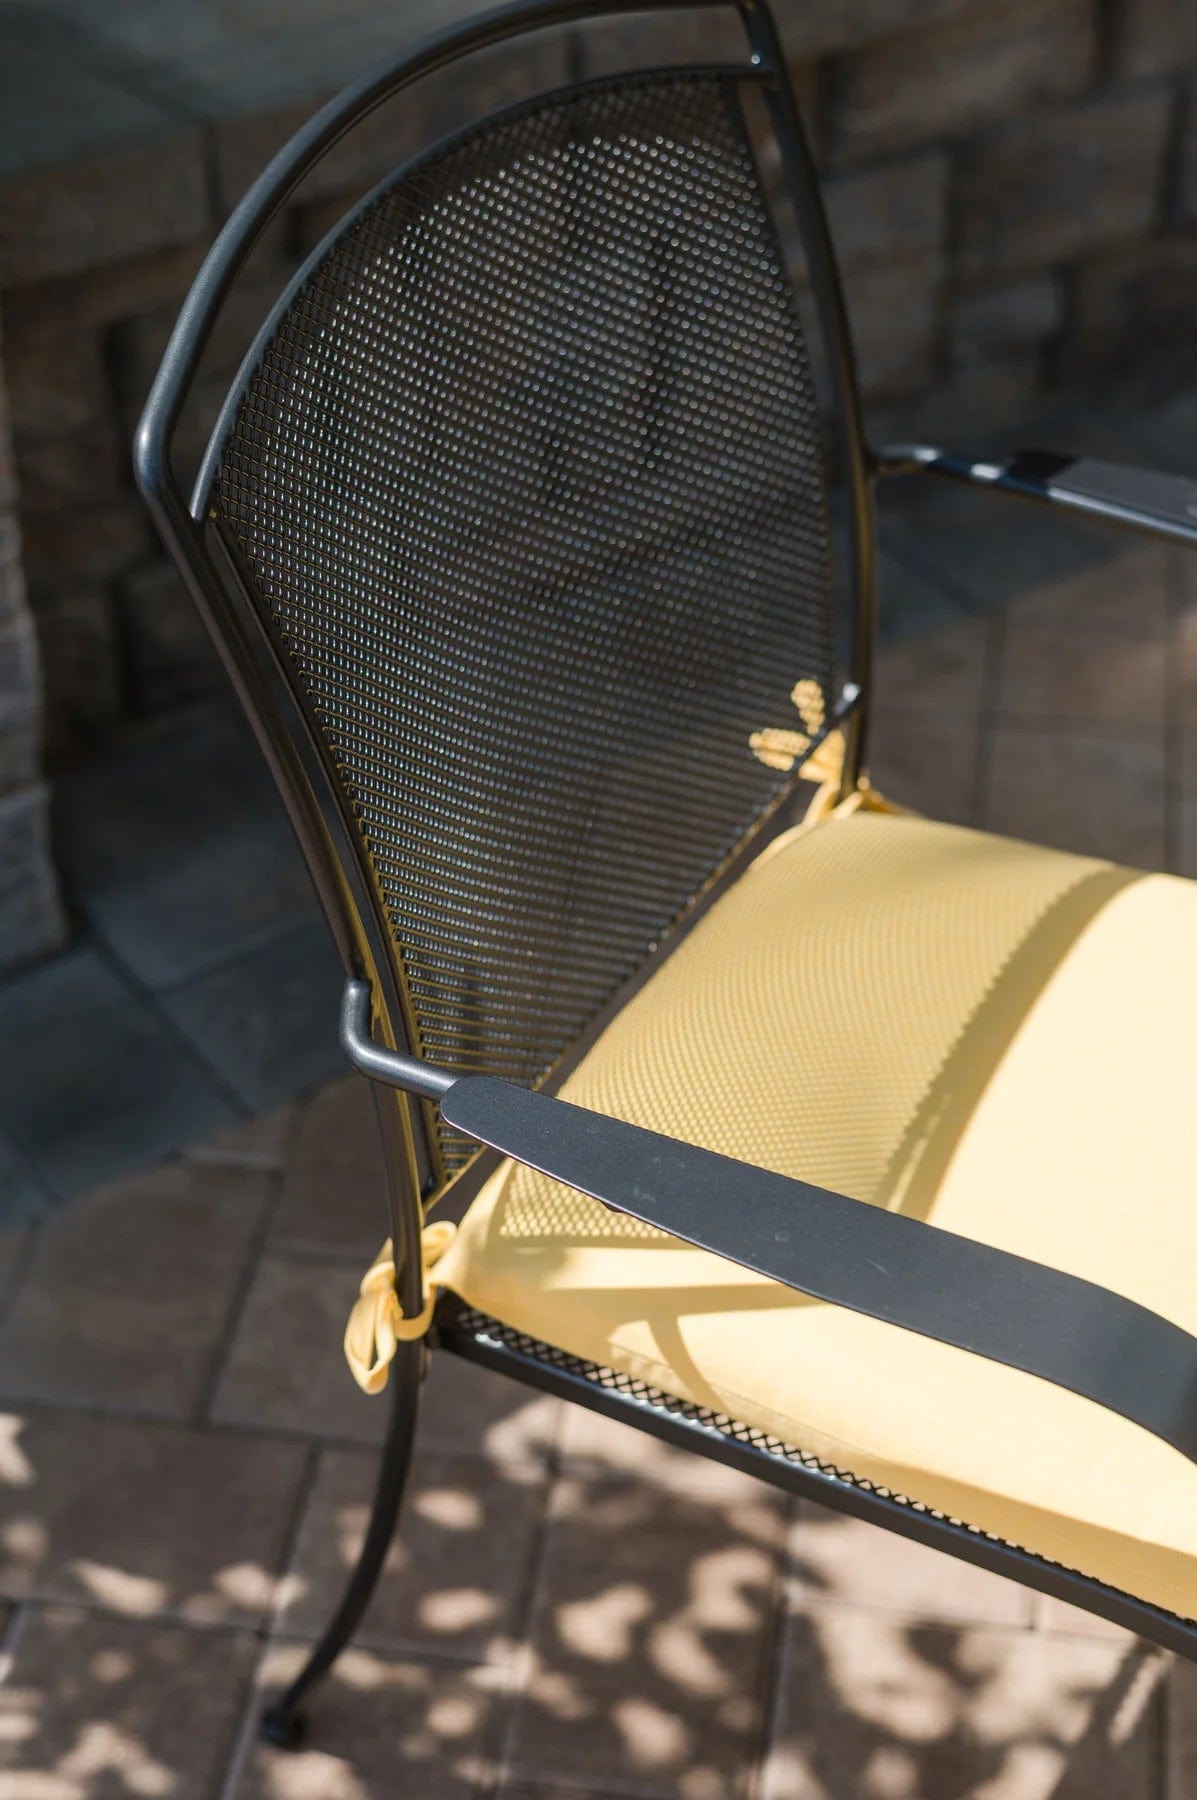 Mesh chair back for quick dry outdoors